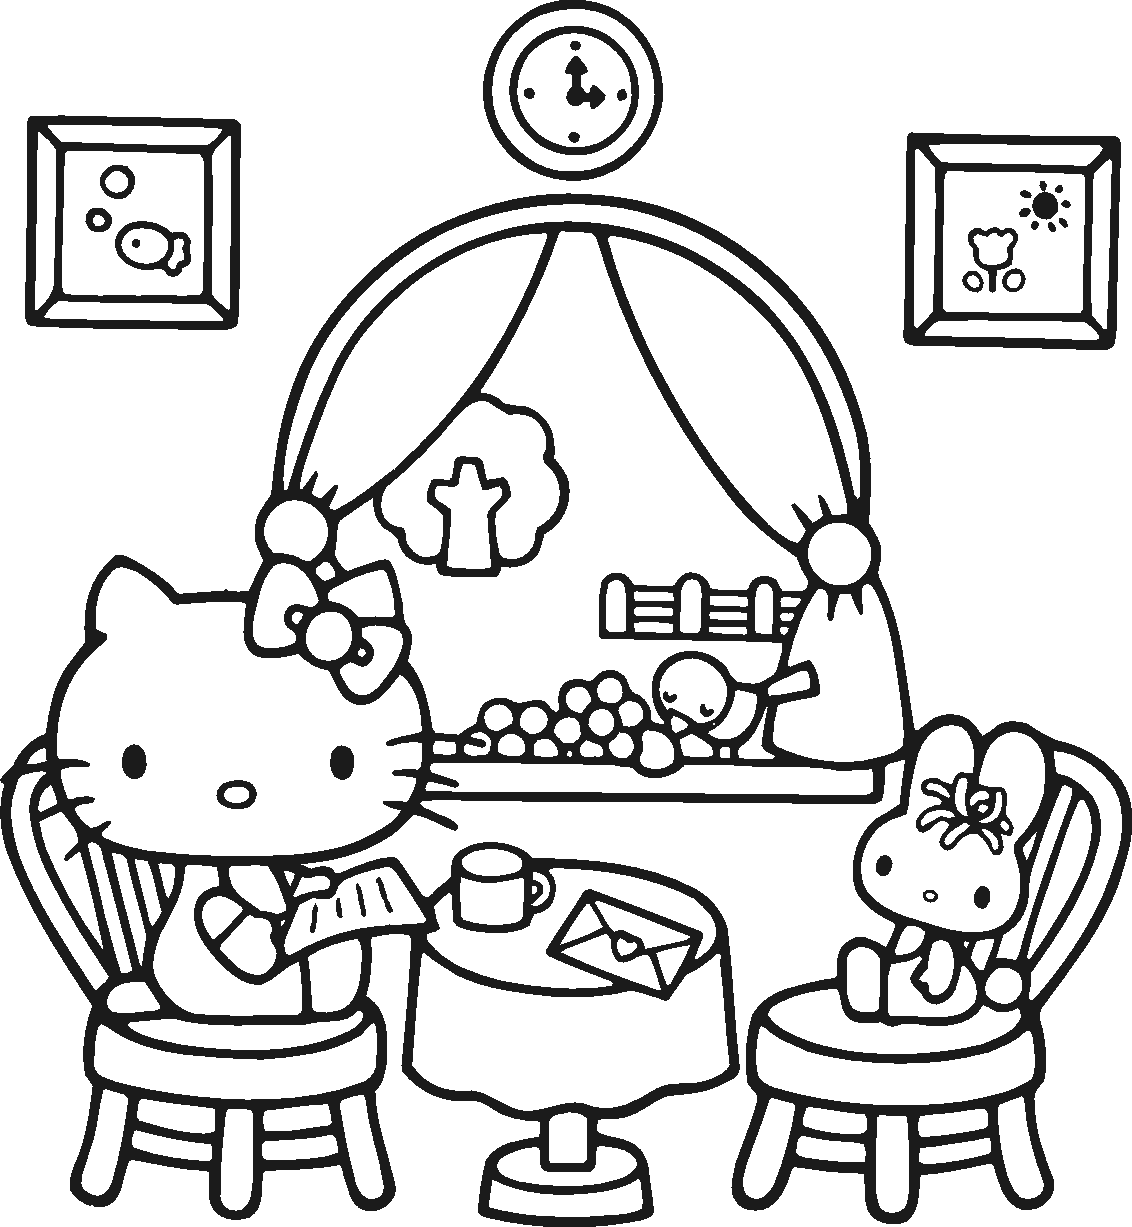 hello-kitty-coloring-pages-coloring-pages-to-print